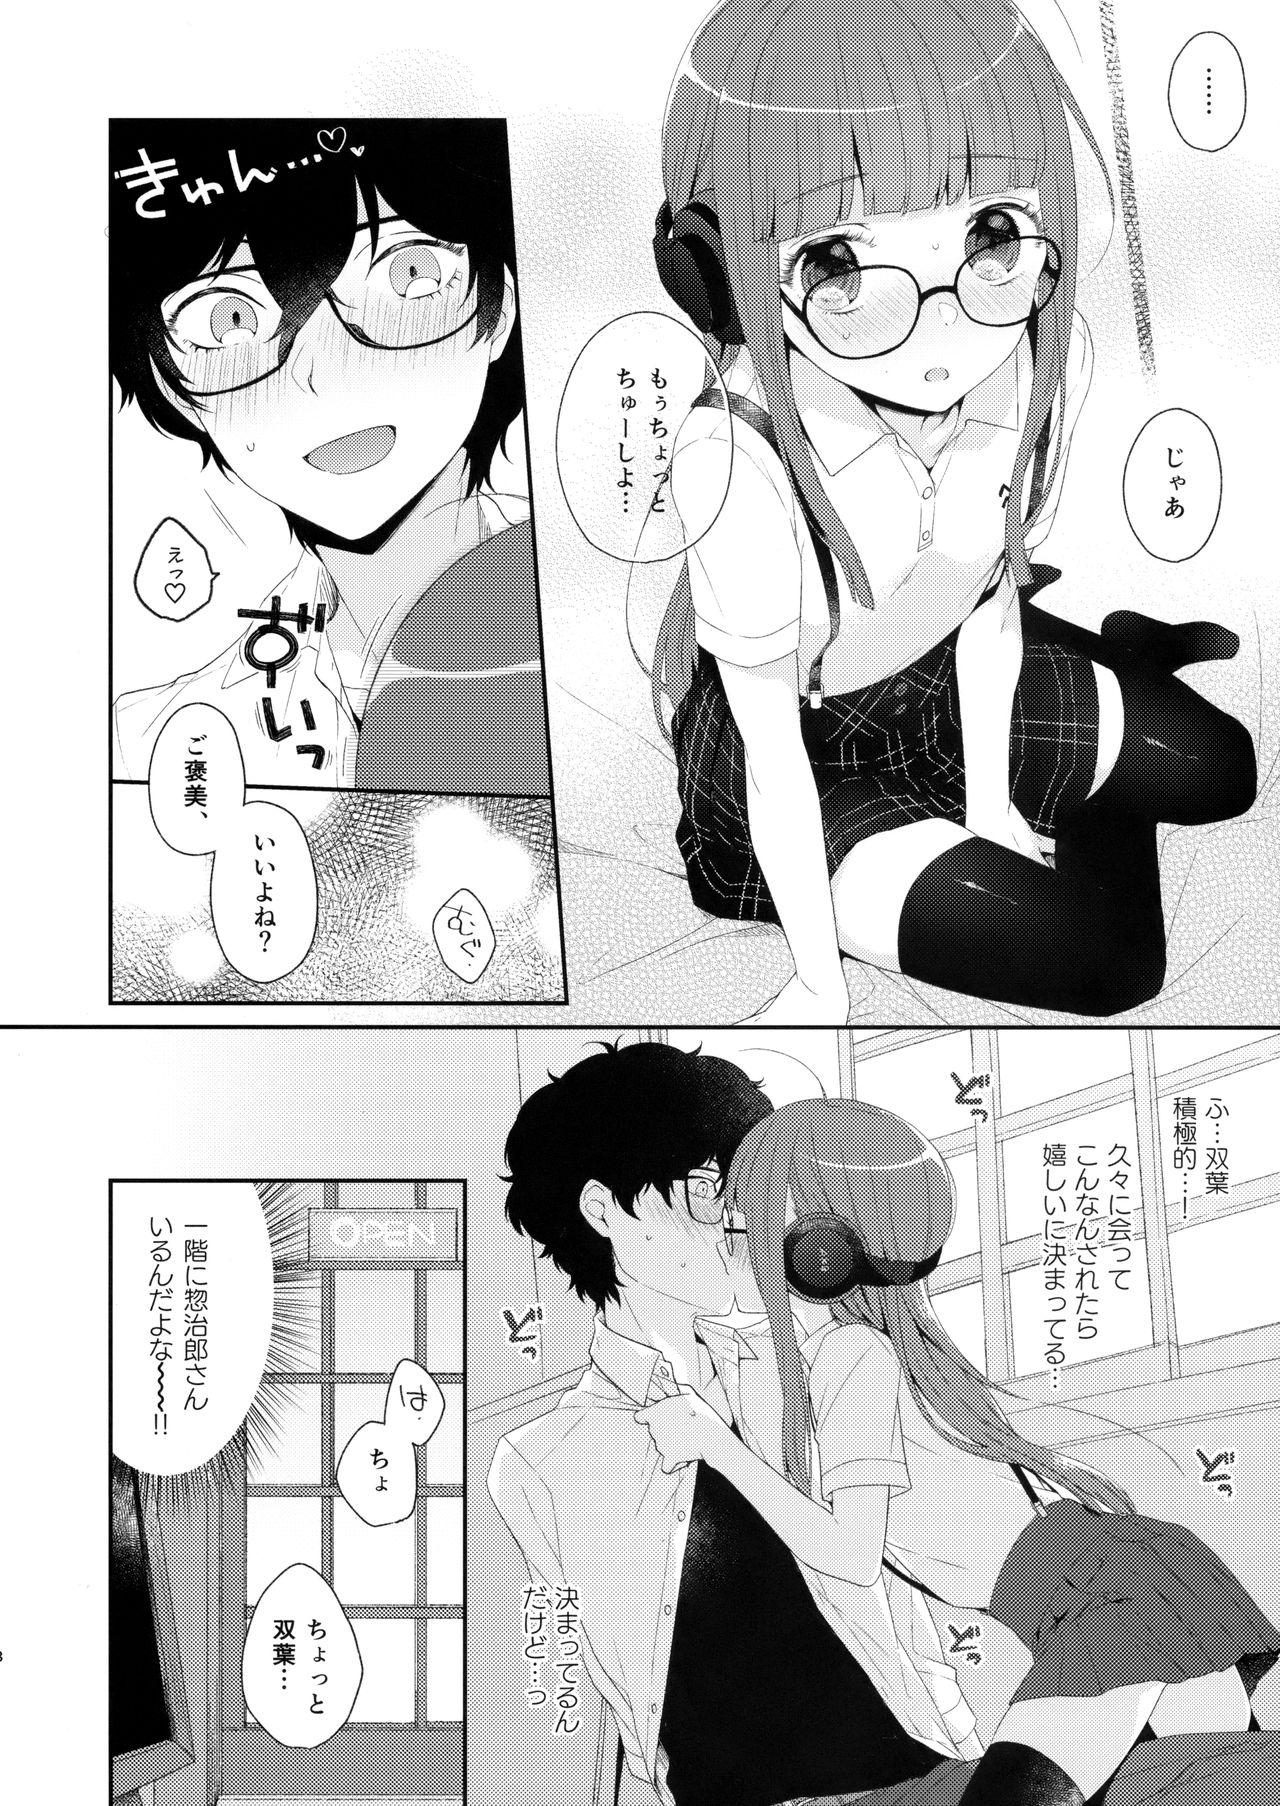 Submissive Yaneura@Afterschool - Persona 5 Penis - Page 7